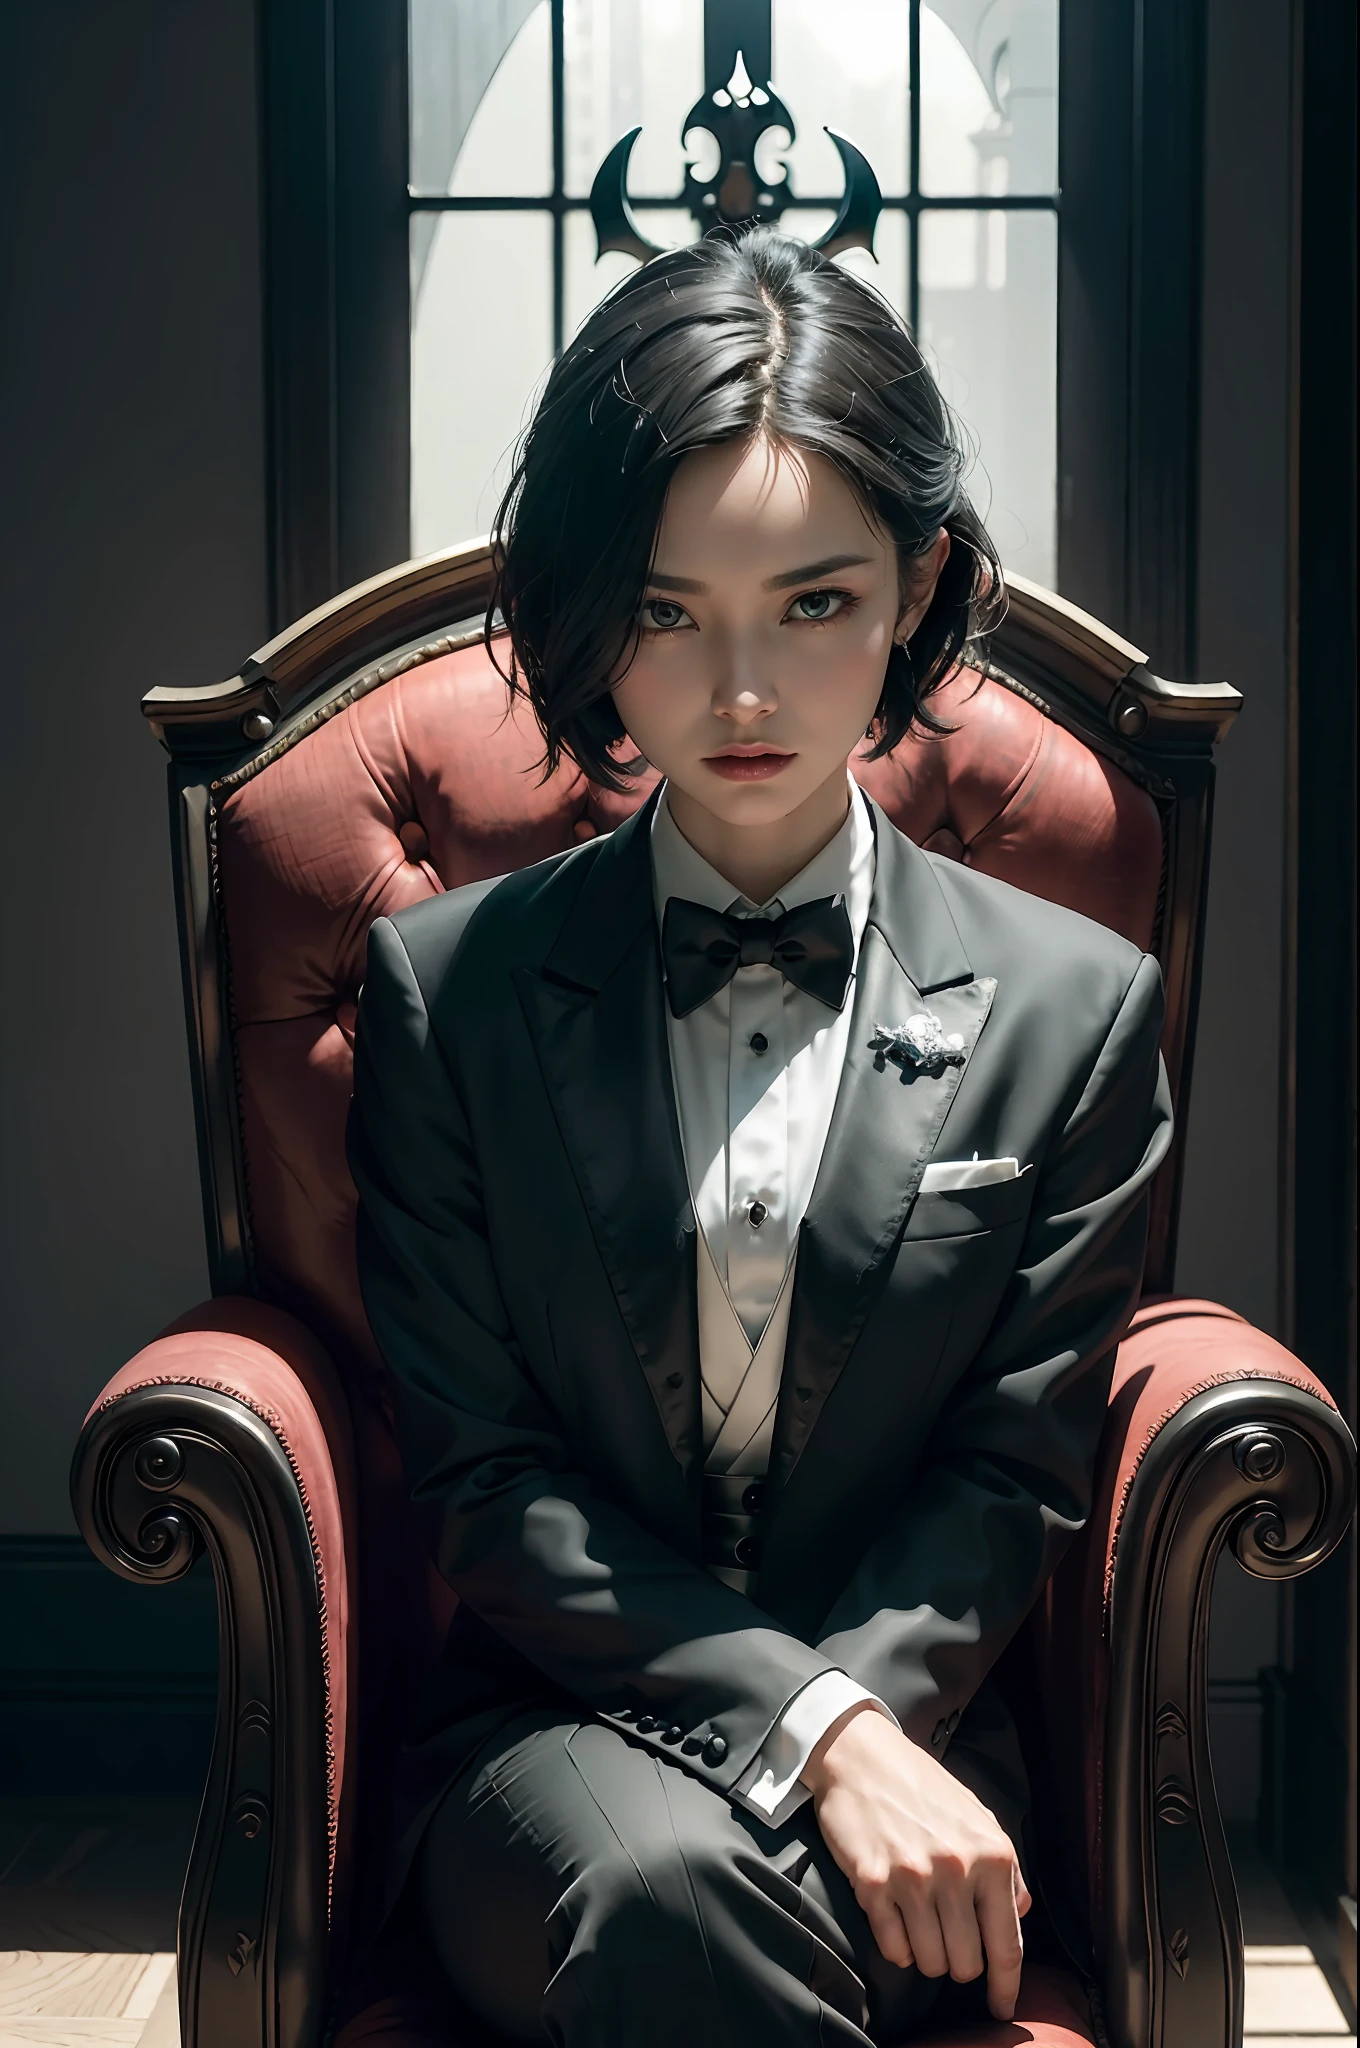 "(exquisitely detailed CG unity 8k wallpaper, masterpiece-quality with stunning realism), (best illumination, best shadow), (best quality), (elegant and demonic style:1.2), sitting elegantly upon an intricately carved chair, wearing a (sleek white tuxedo:1.2), (piercing black eyes+short black hair:0.8), surrounded by an ominous and dark atmosphere, accentuated by dramatic and striking lighting, imbued with a sense of surreal fantasy".